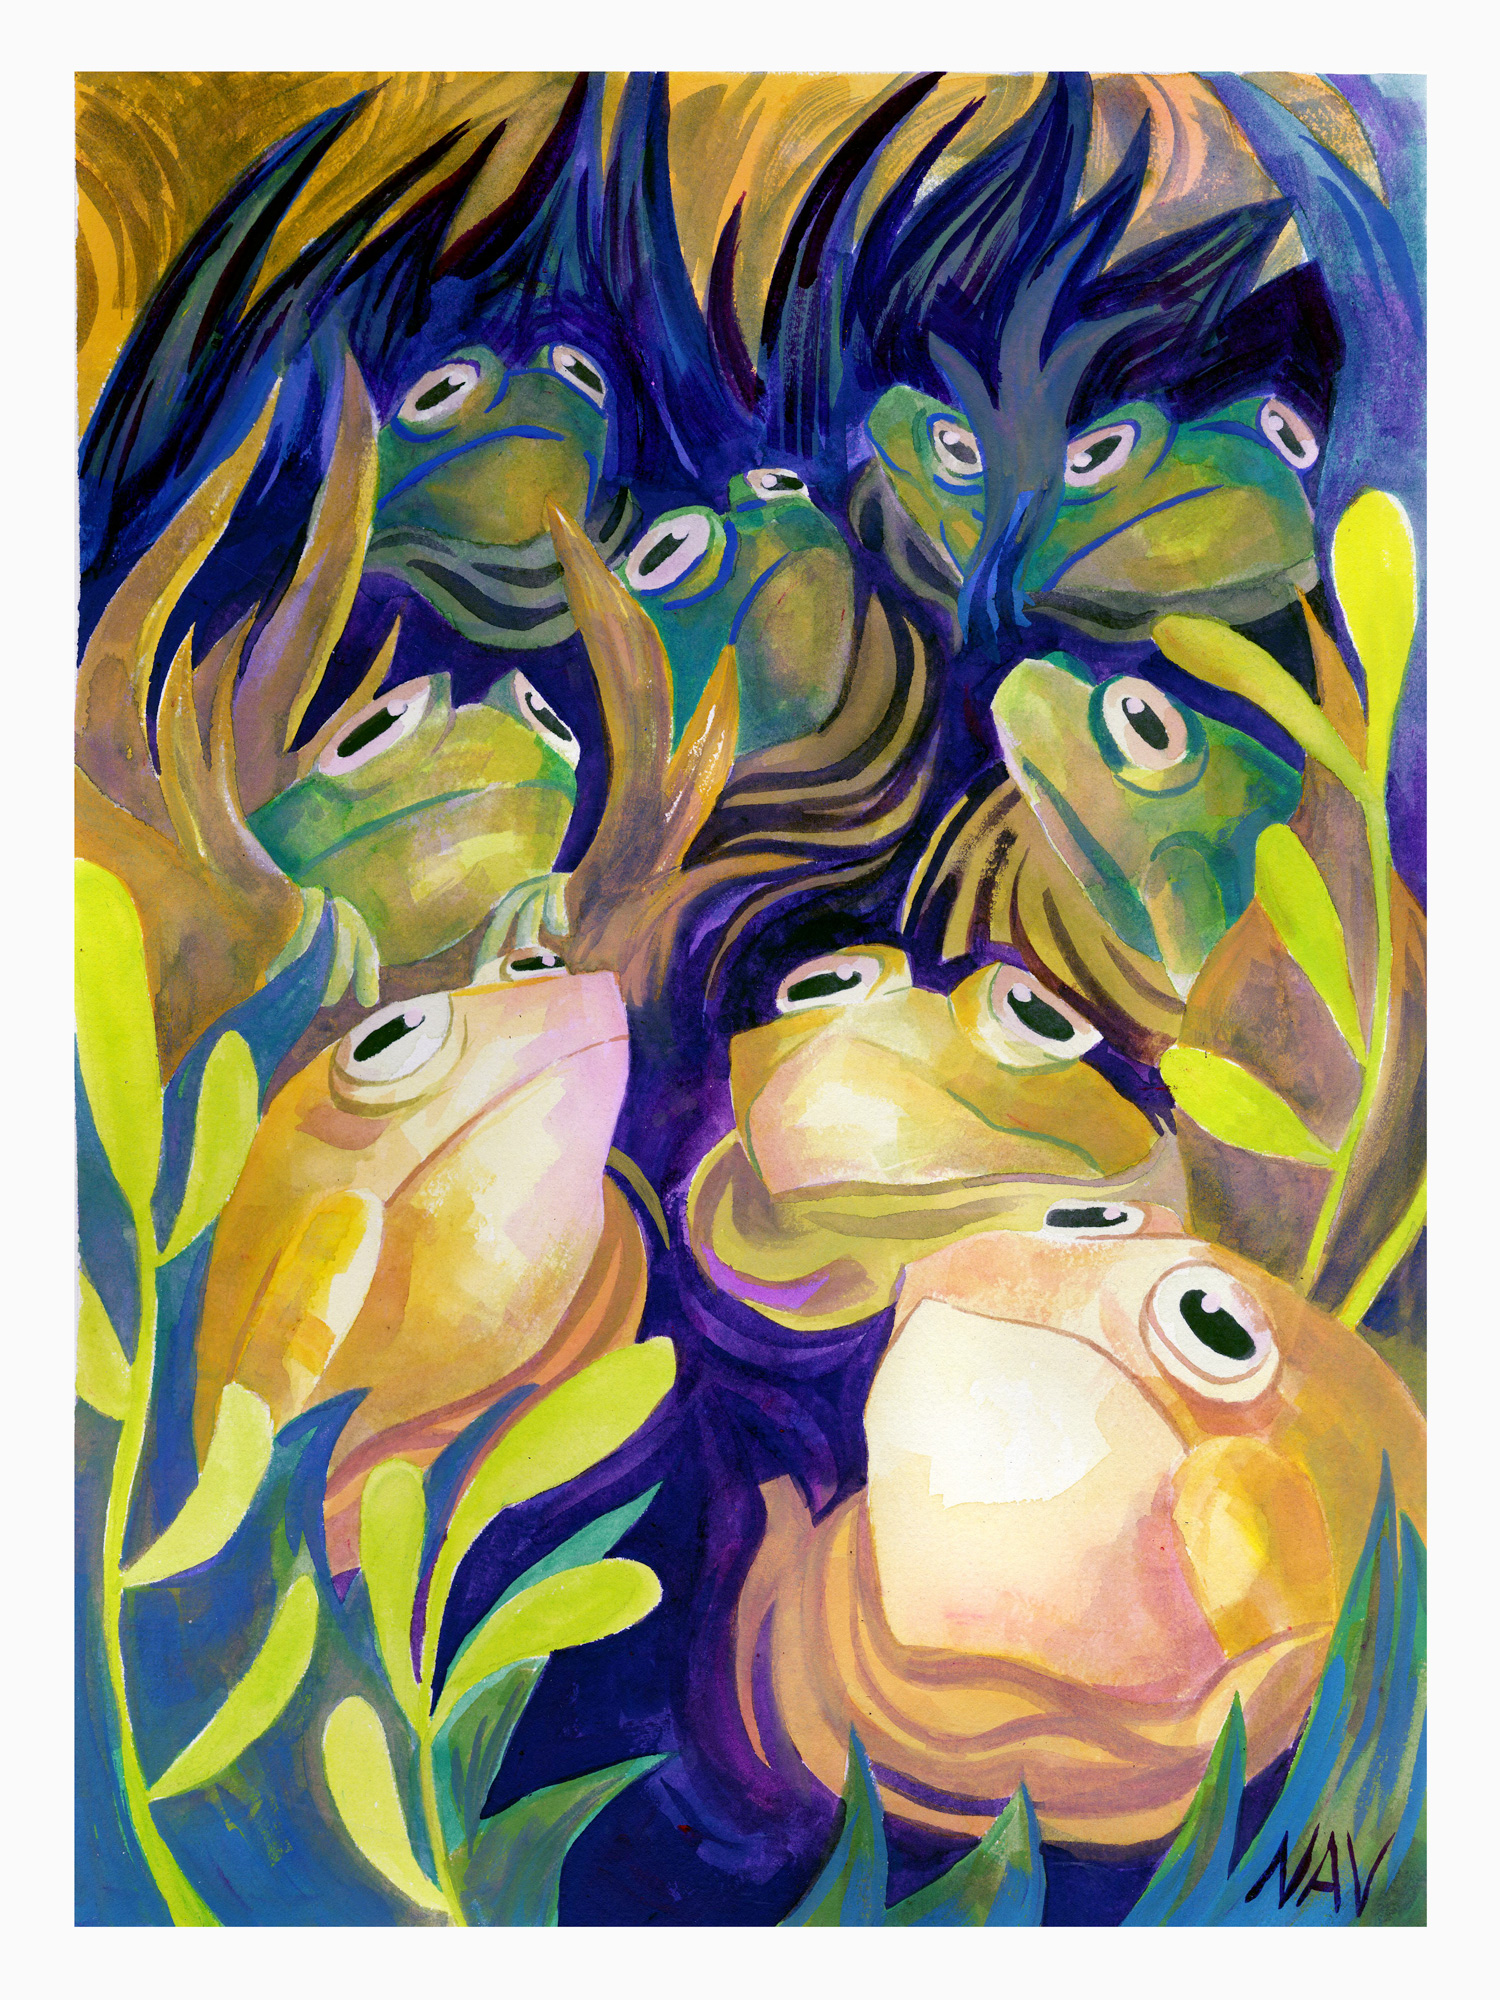 An illustration featuring frogs